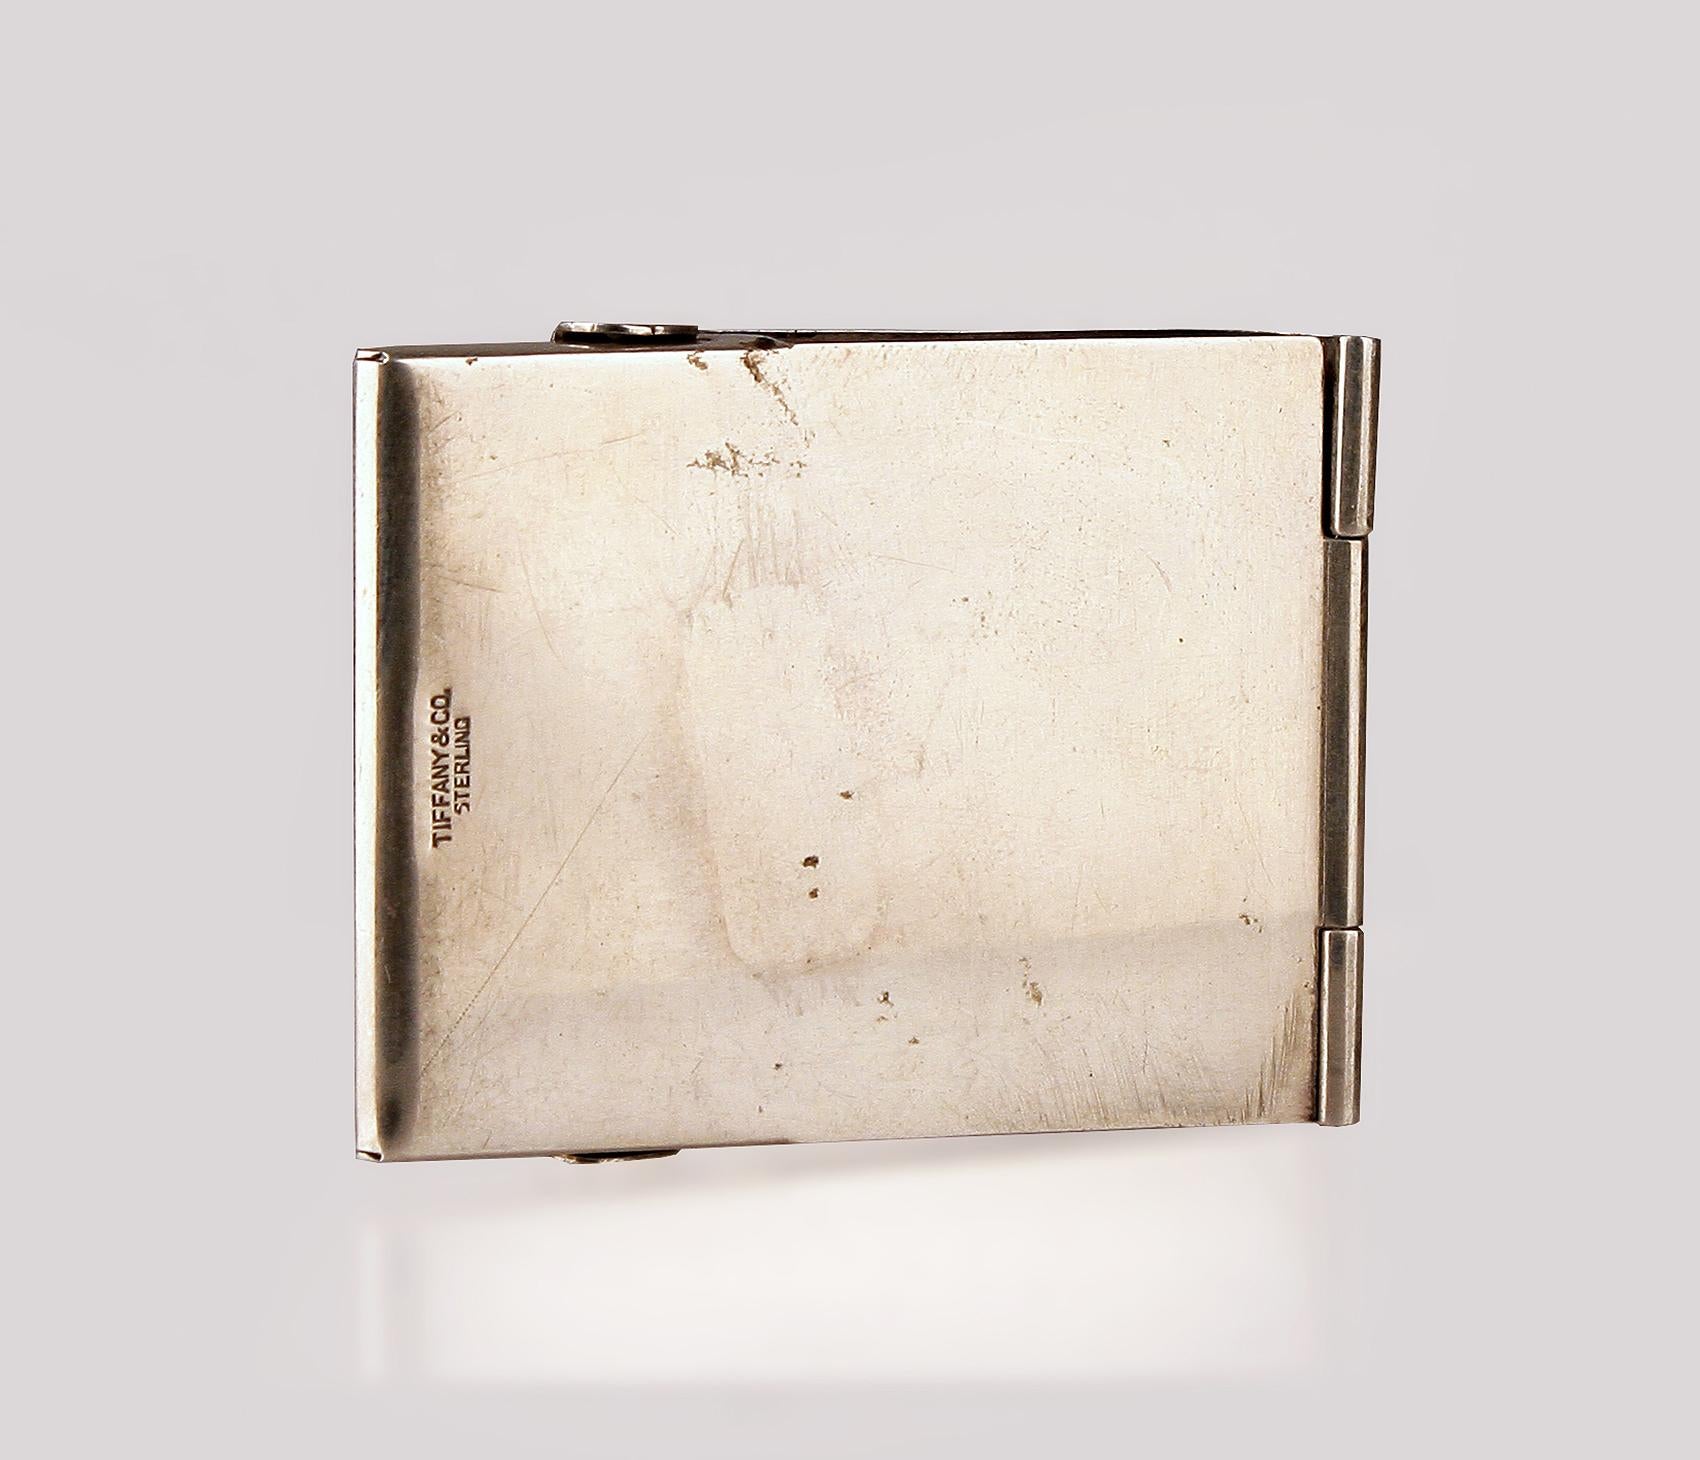 American Mid-20th Century Sterling Silver Matchbook Cover/Match Holder by Tiffany & Co. For Sale